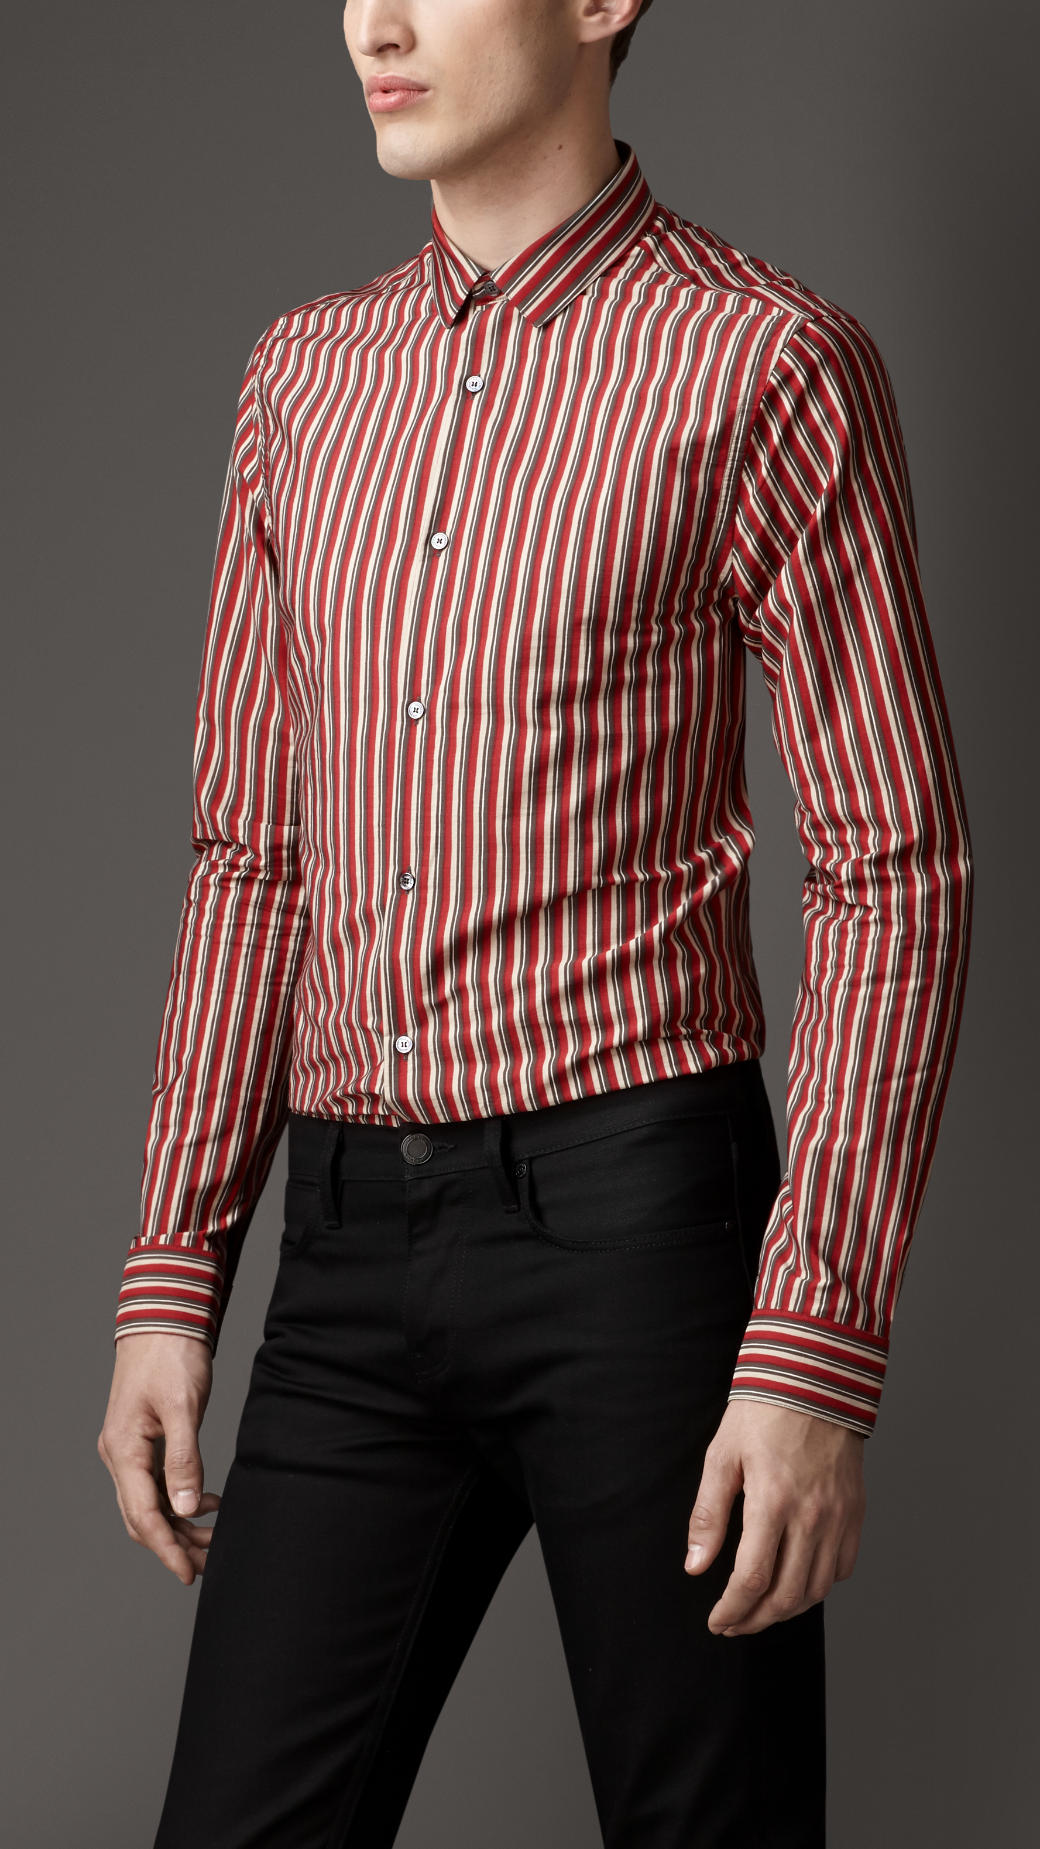 Lyst - Burberry Slim Fit Cotton Silk Stripe Shirt in Red for Men